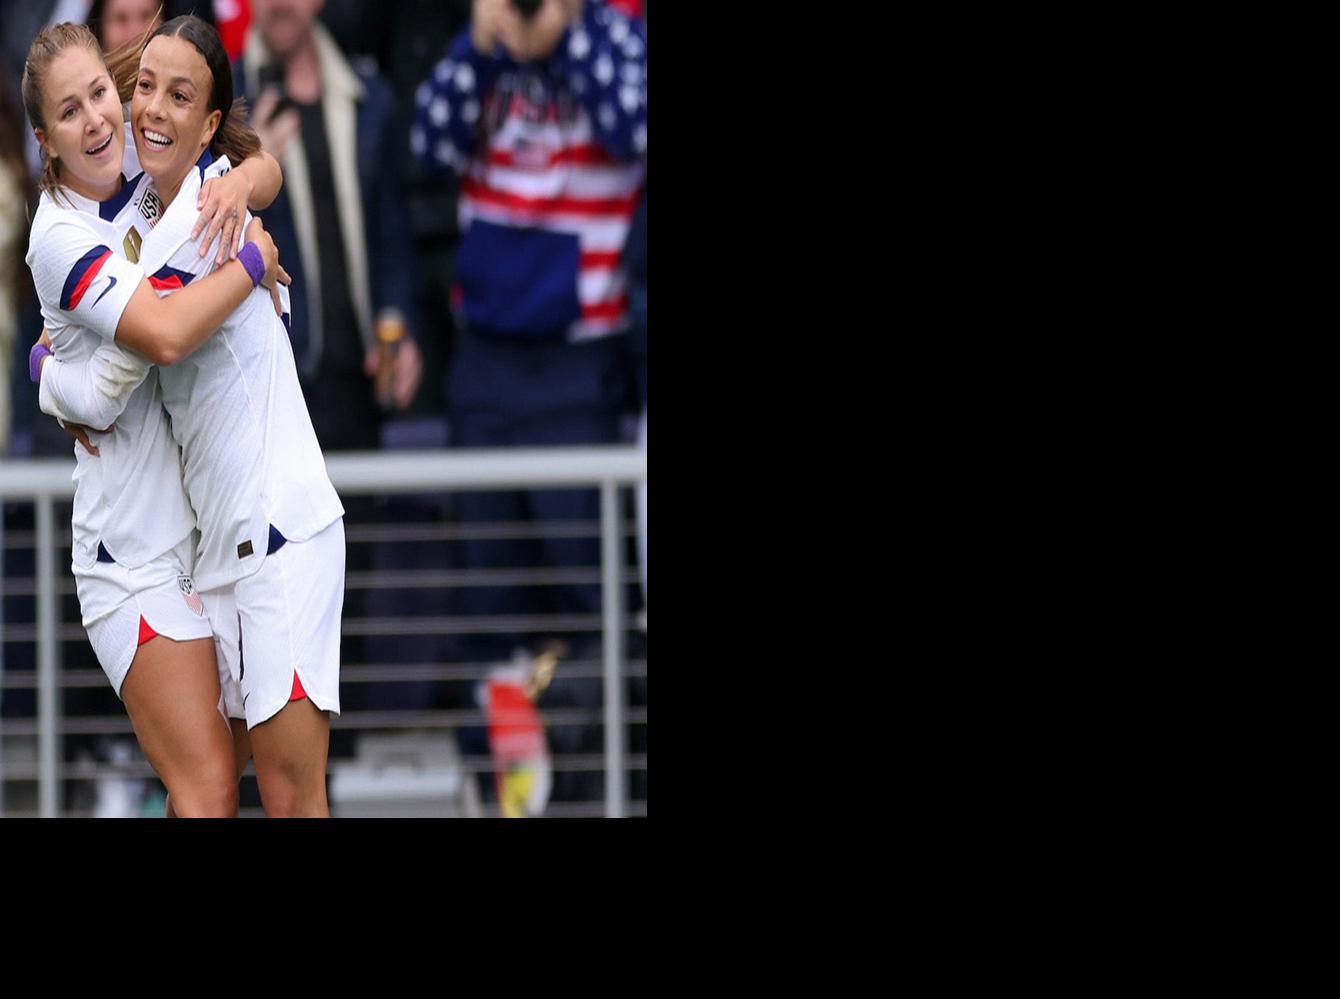 SheBelieves Cup 2023, women's soccer, all team rosters: USWNT, Canada,  Japan, Brazil - full squad lists